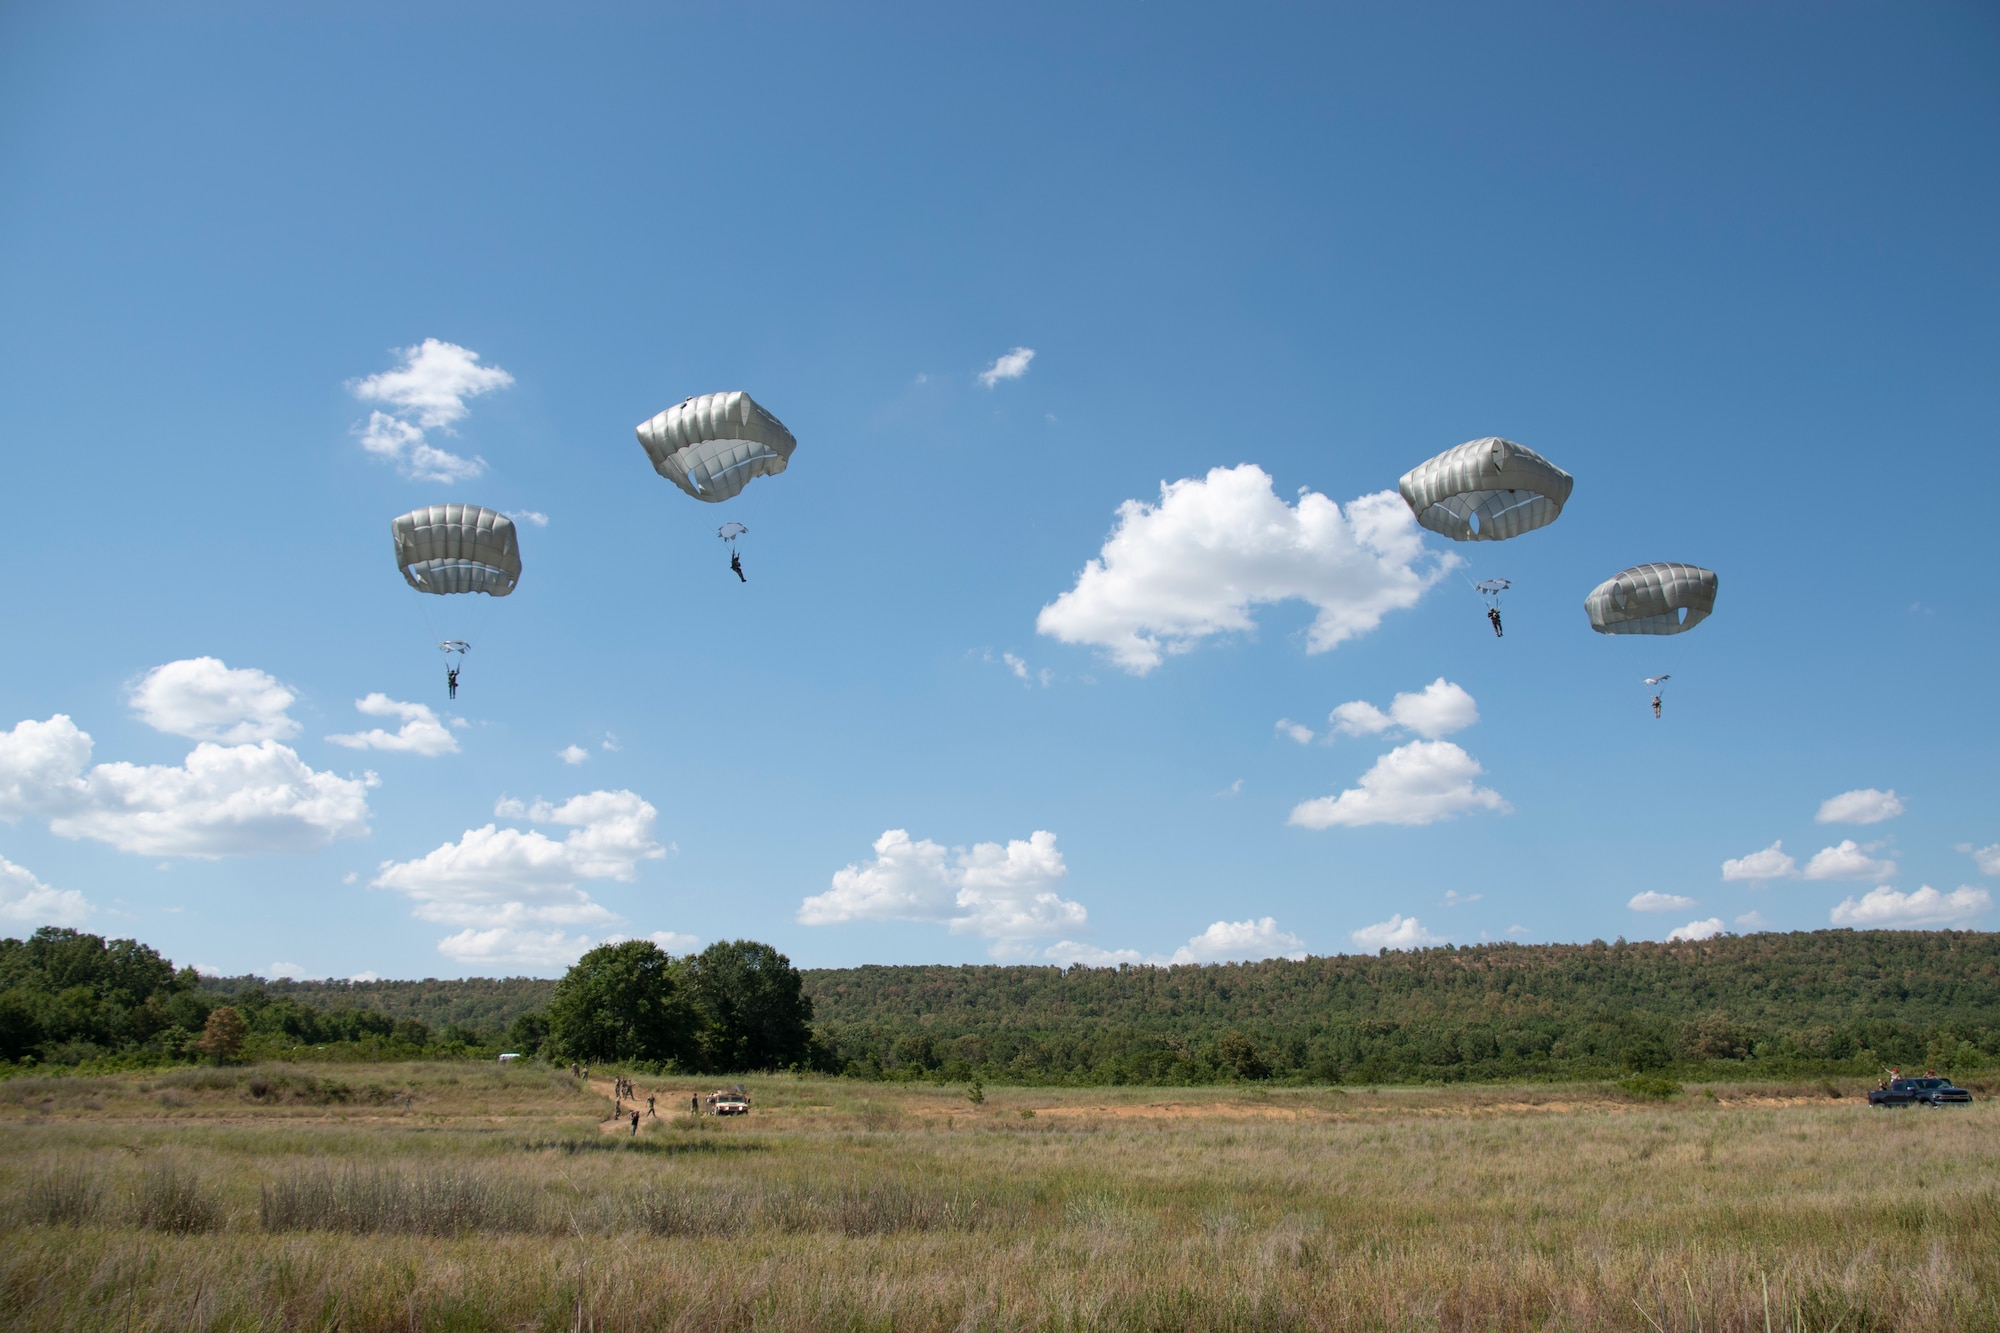 Soldiers from 2nd Battalion, 134th Infantry Regiment, 45th Infantry Brigade Combat Team, Nebraska Army National Guard, descend under parachute canopies during airborne operations training from a C-130 “Hercules” on Rattlesnake Drop Zone at Fort Chaffee, Arkansas, July 23, 2022. The 2nd Battalion is the newest unit to join the 45th IBCT, bringing with them airborne capabilities that the 45th has not had in more than 50 years. (Oklahoma National Guard photo by Staff Sgt. John Stoner)